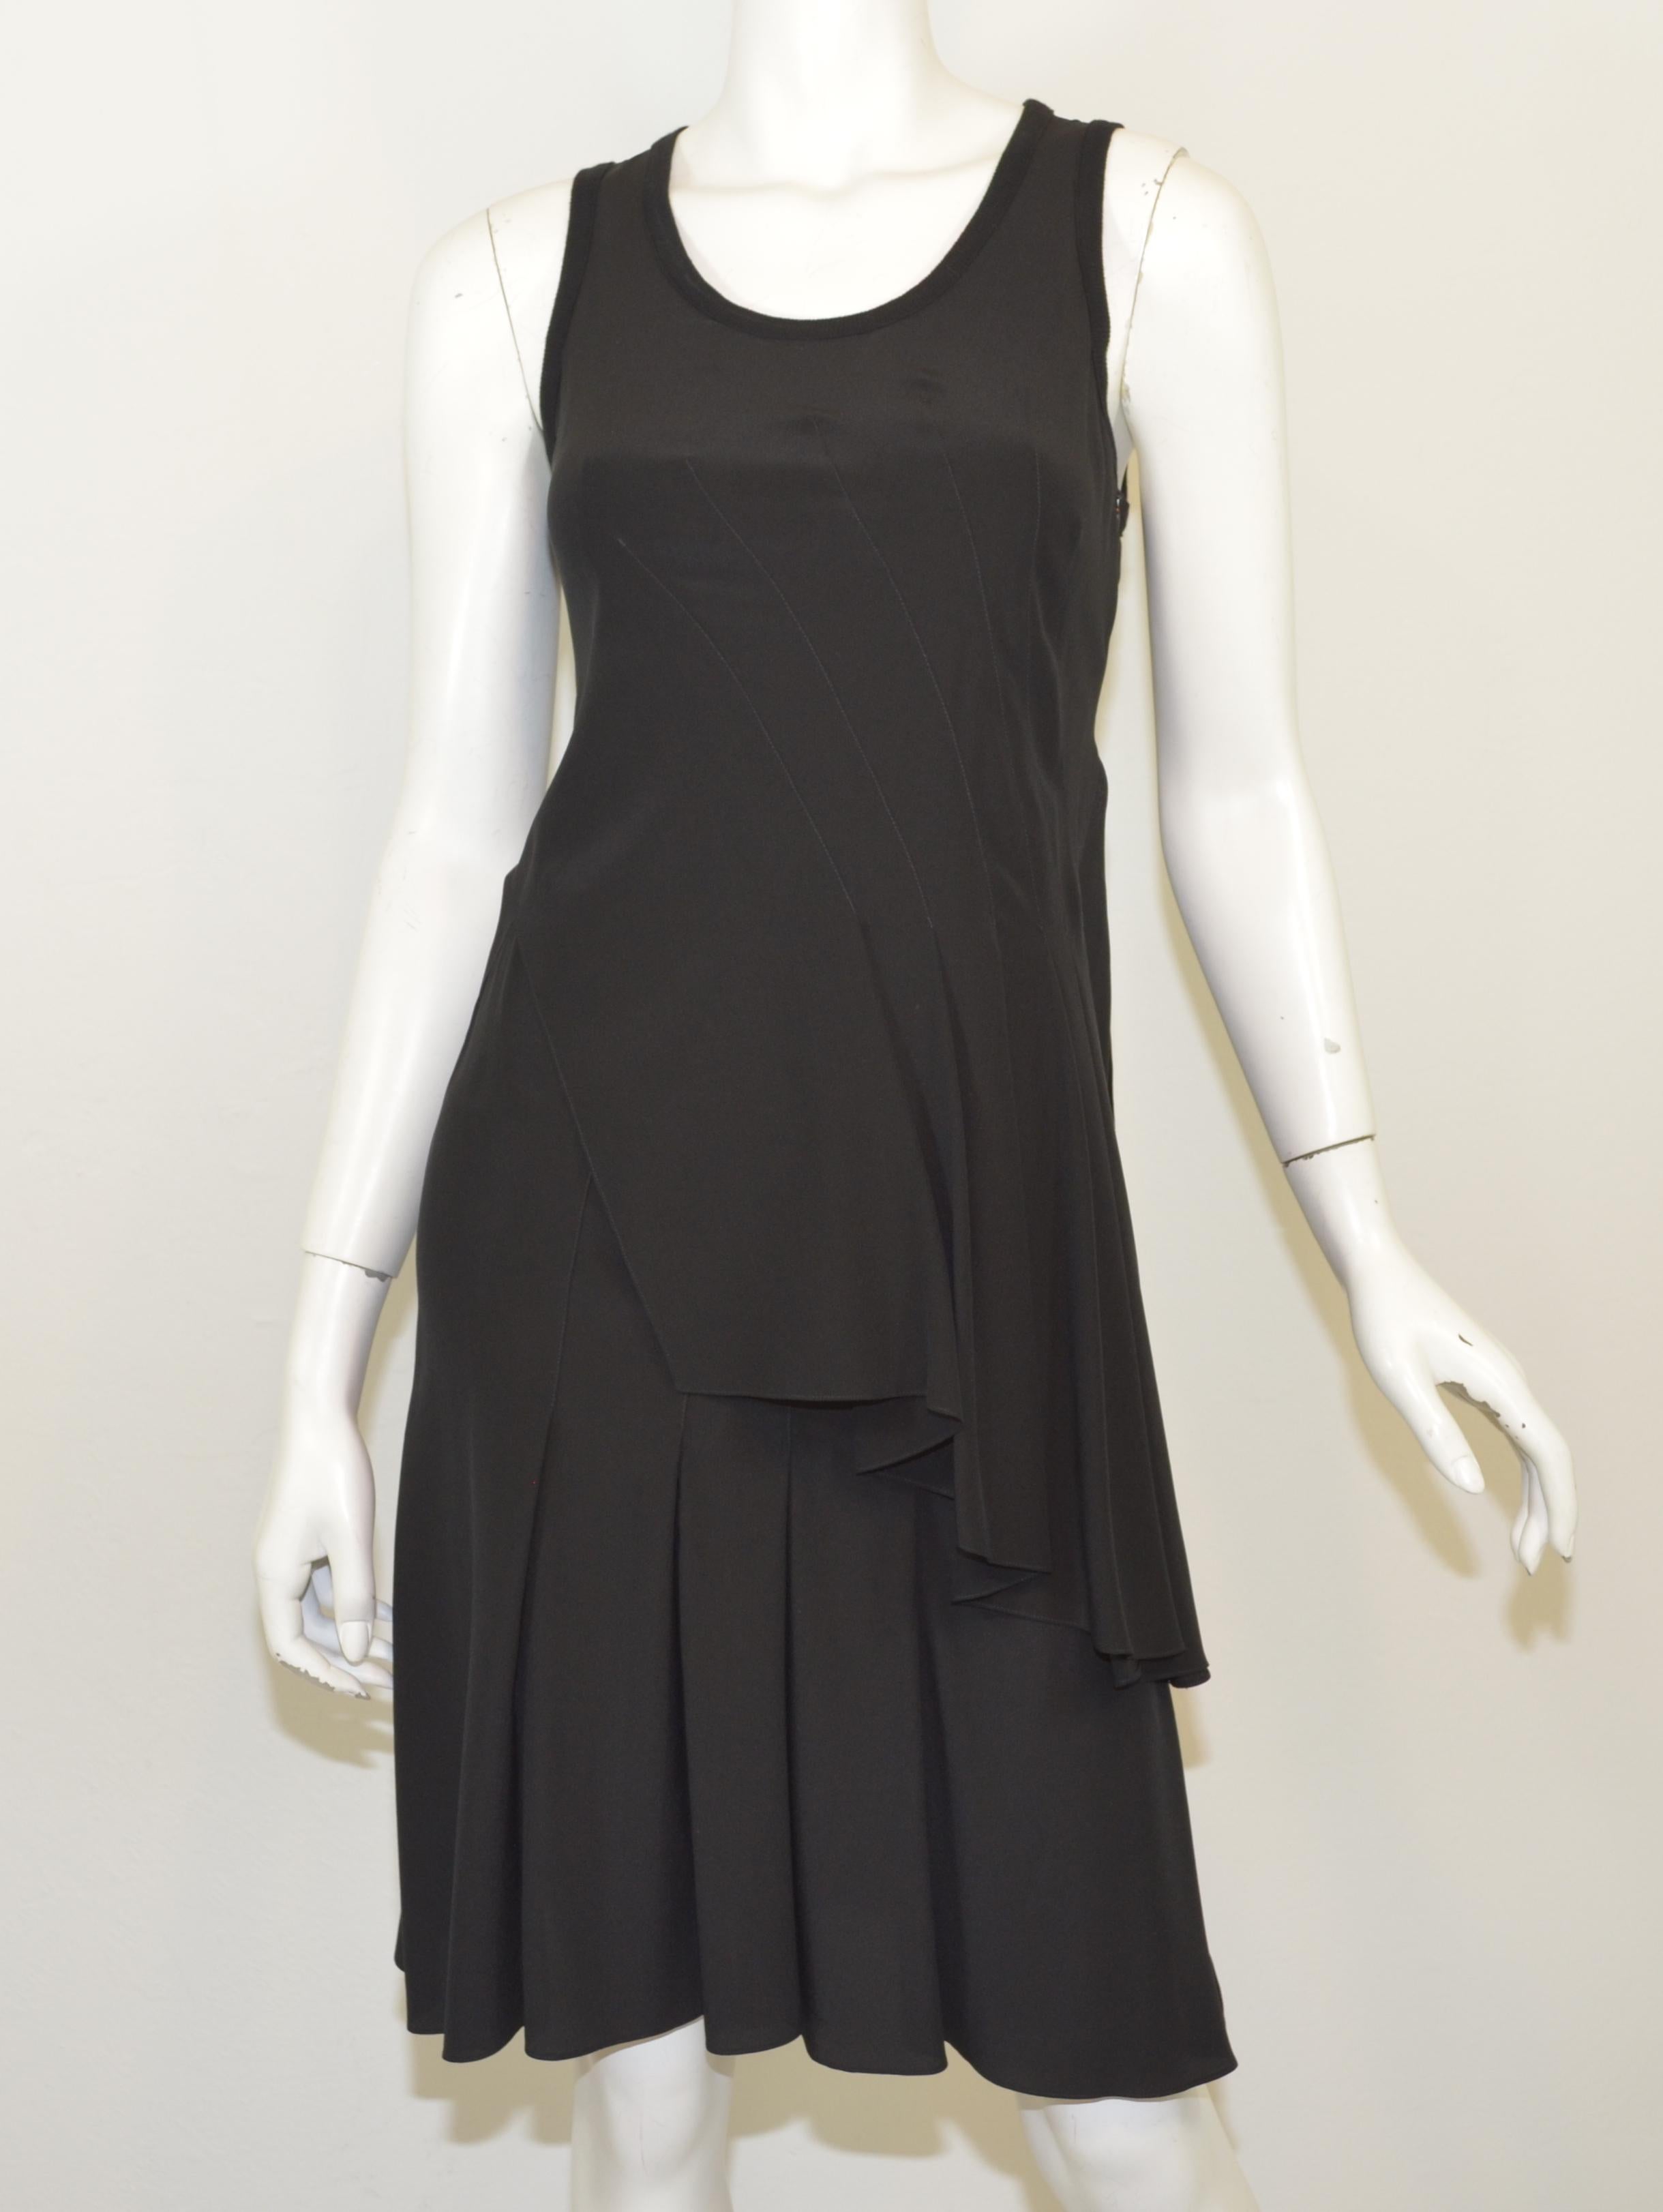 Givenchy black dress 100% silk features an asymmetric pleated design throughout with a knit trim collar, and has a side zipper closure. Dress is a size 38, Made in Italy

Measurements: bust 32'', waist 30'', hips 34'', length 39''